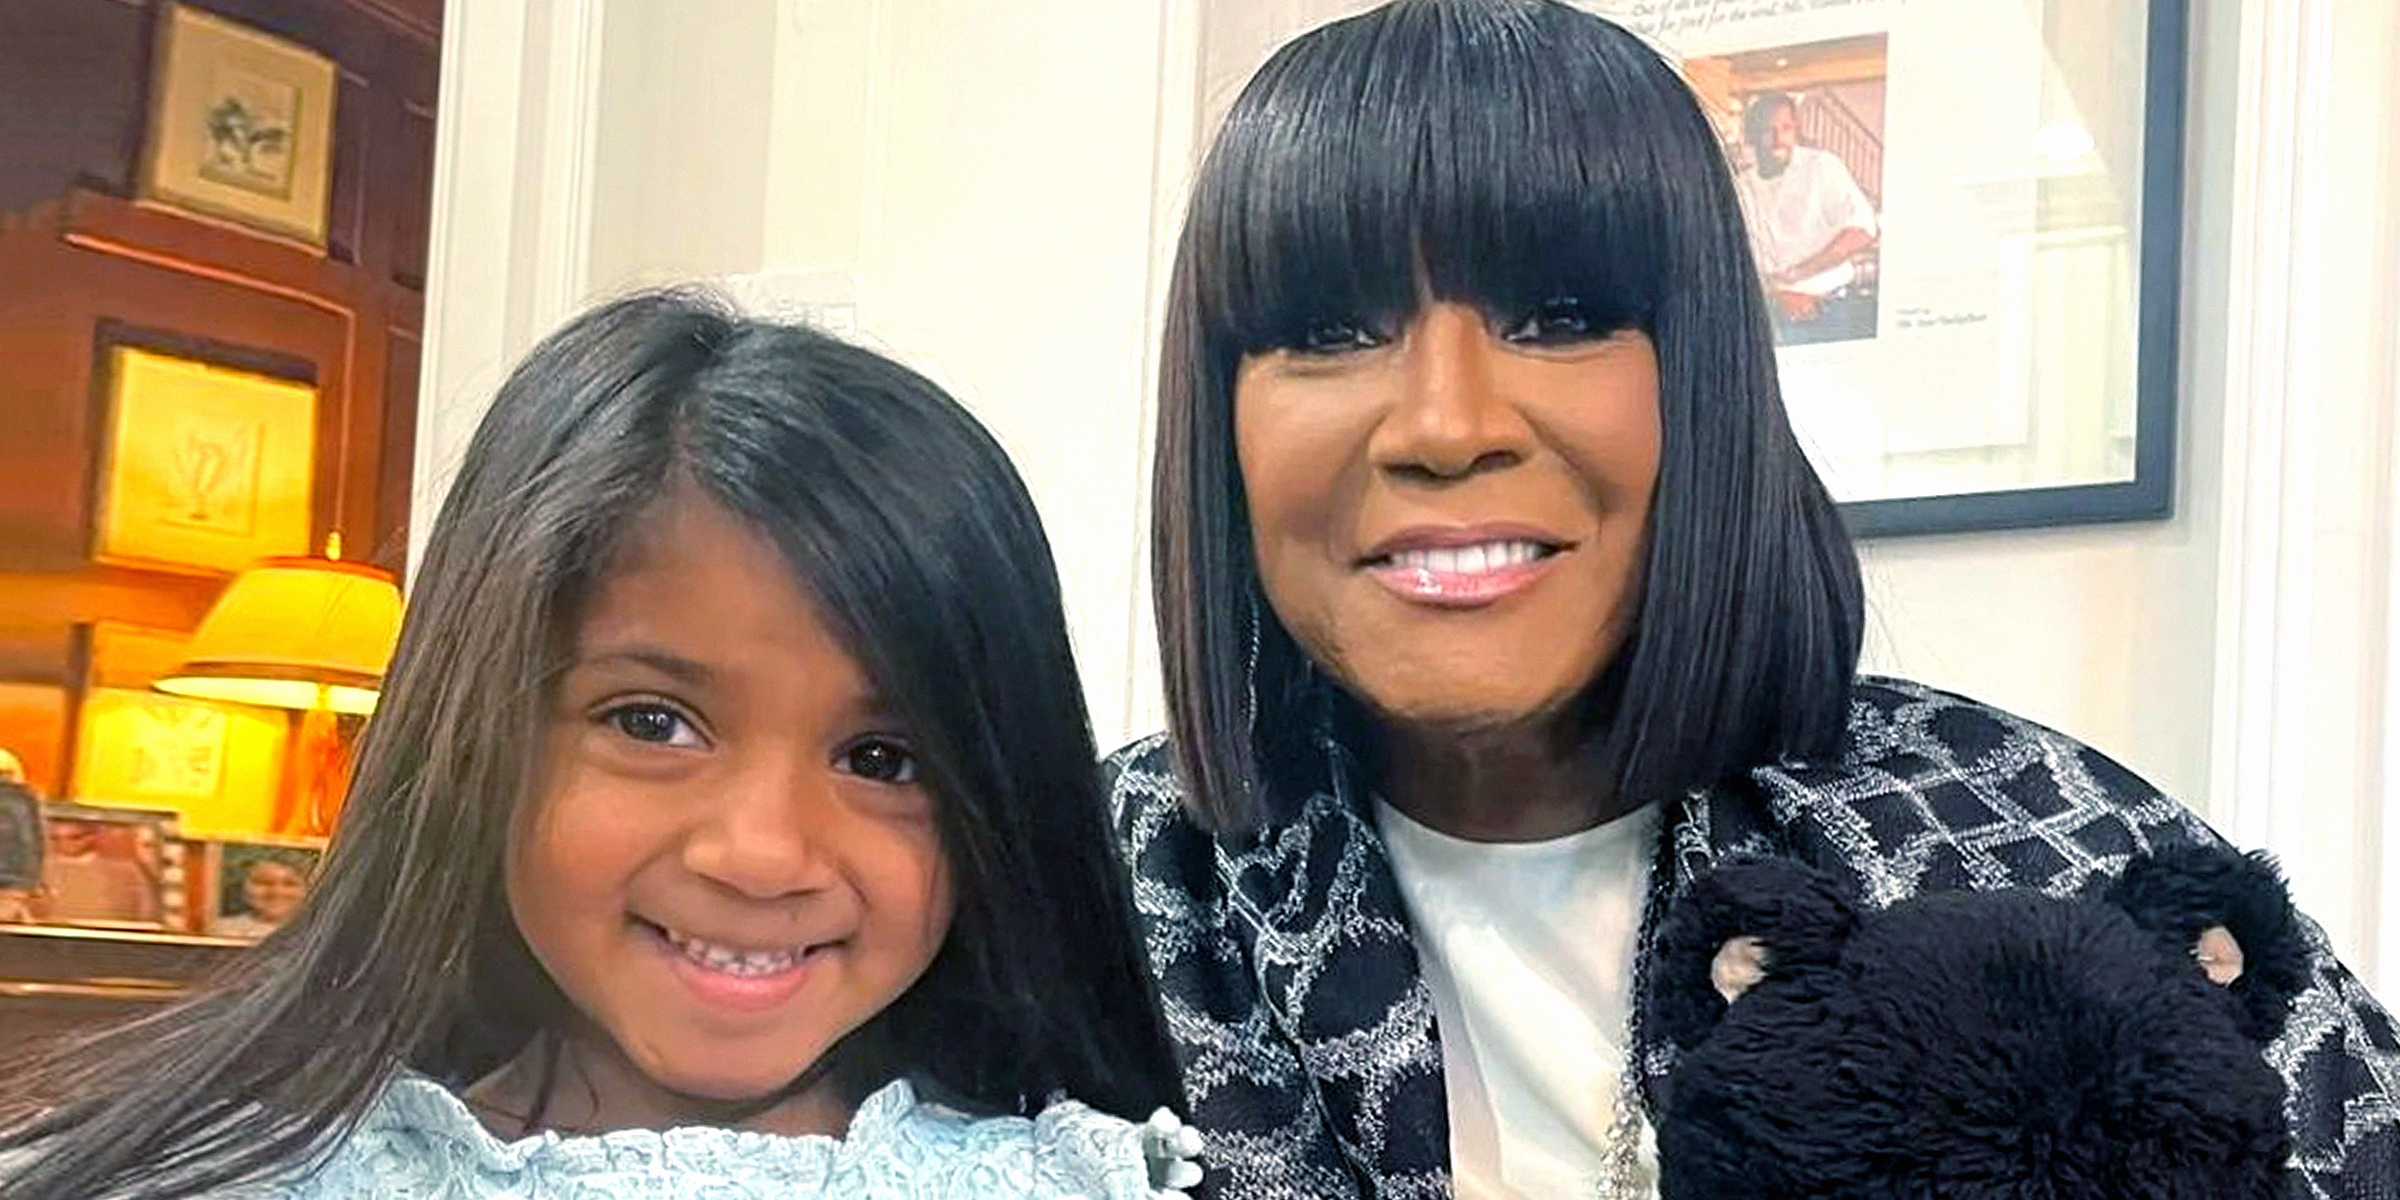 Patti LaBelle with her granddaughter | Source: Instagram/mspattilabelle